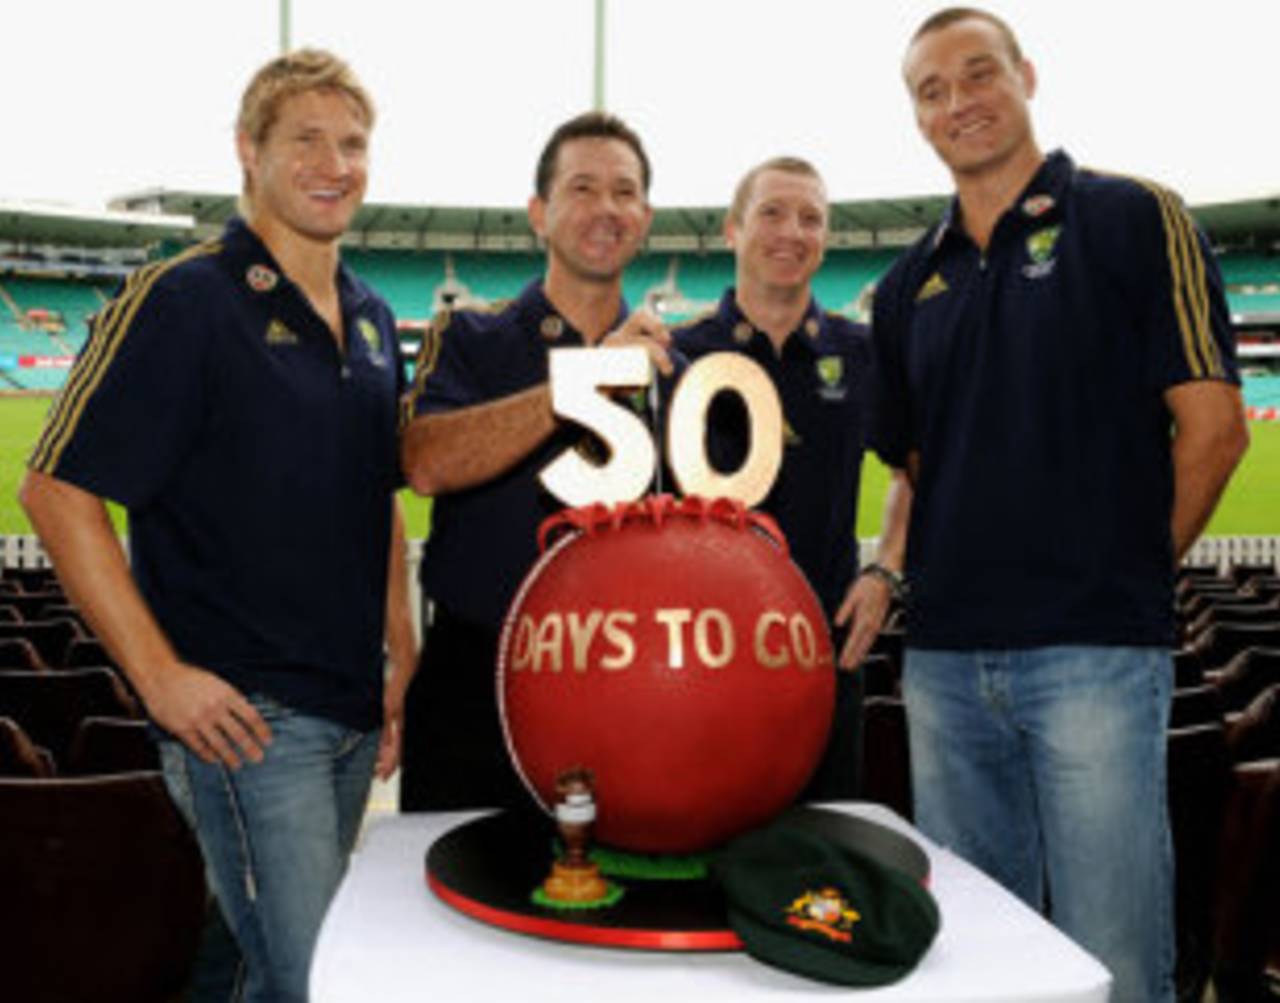 Shane Watson, Ricky Ponting, Brad Haddin and Stuart Clark after the squad announcement, Sydney, May 20, 2009